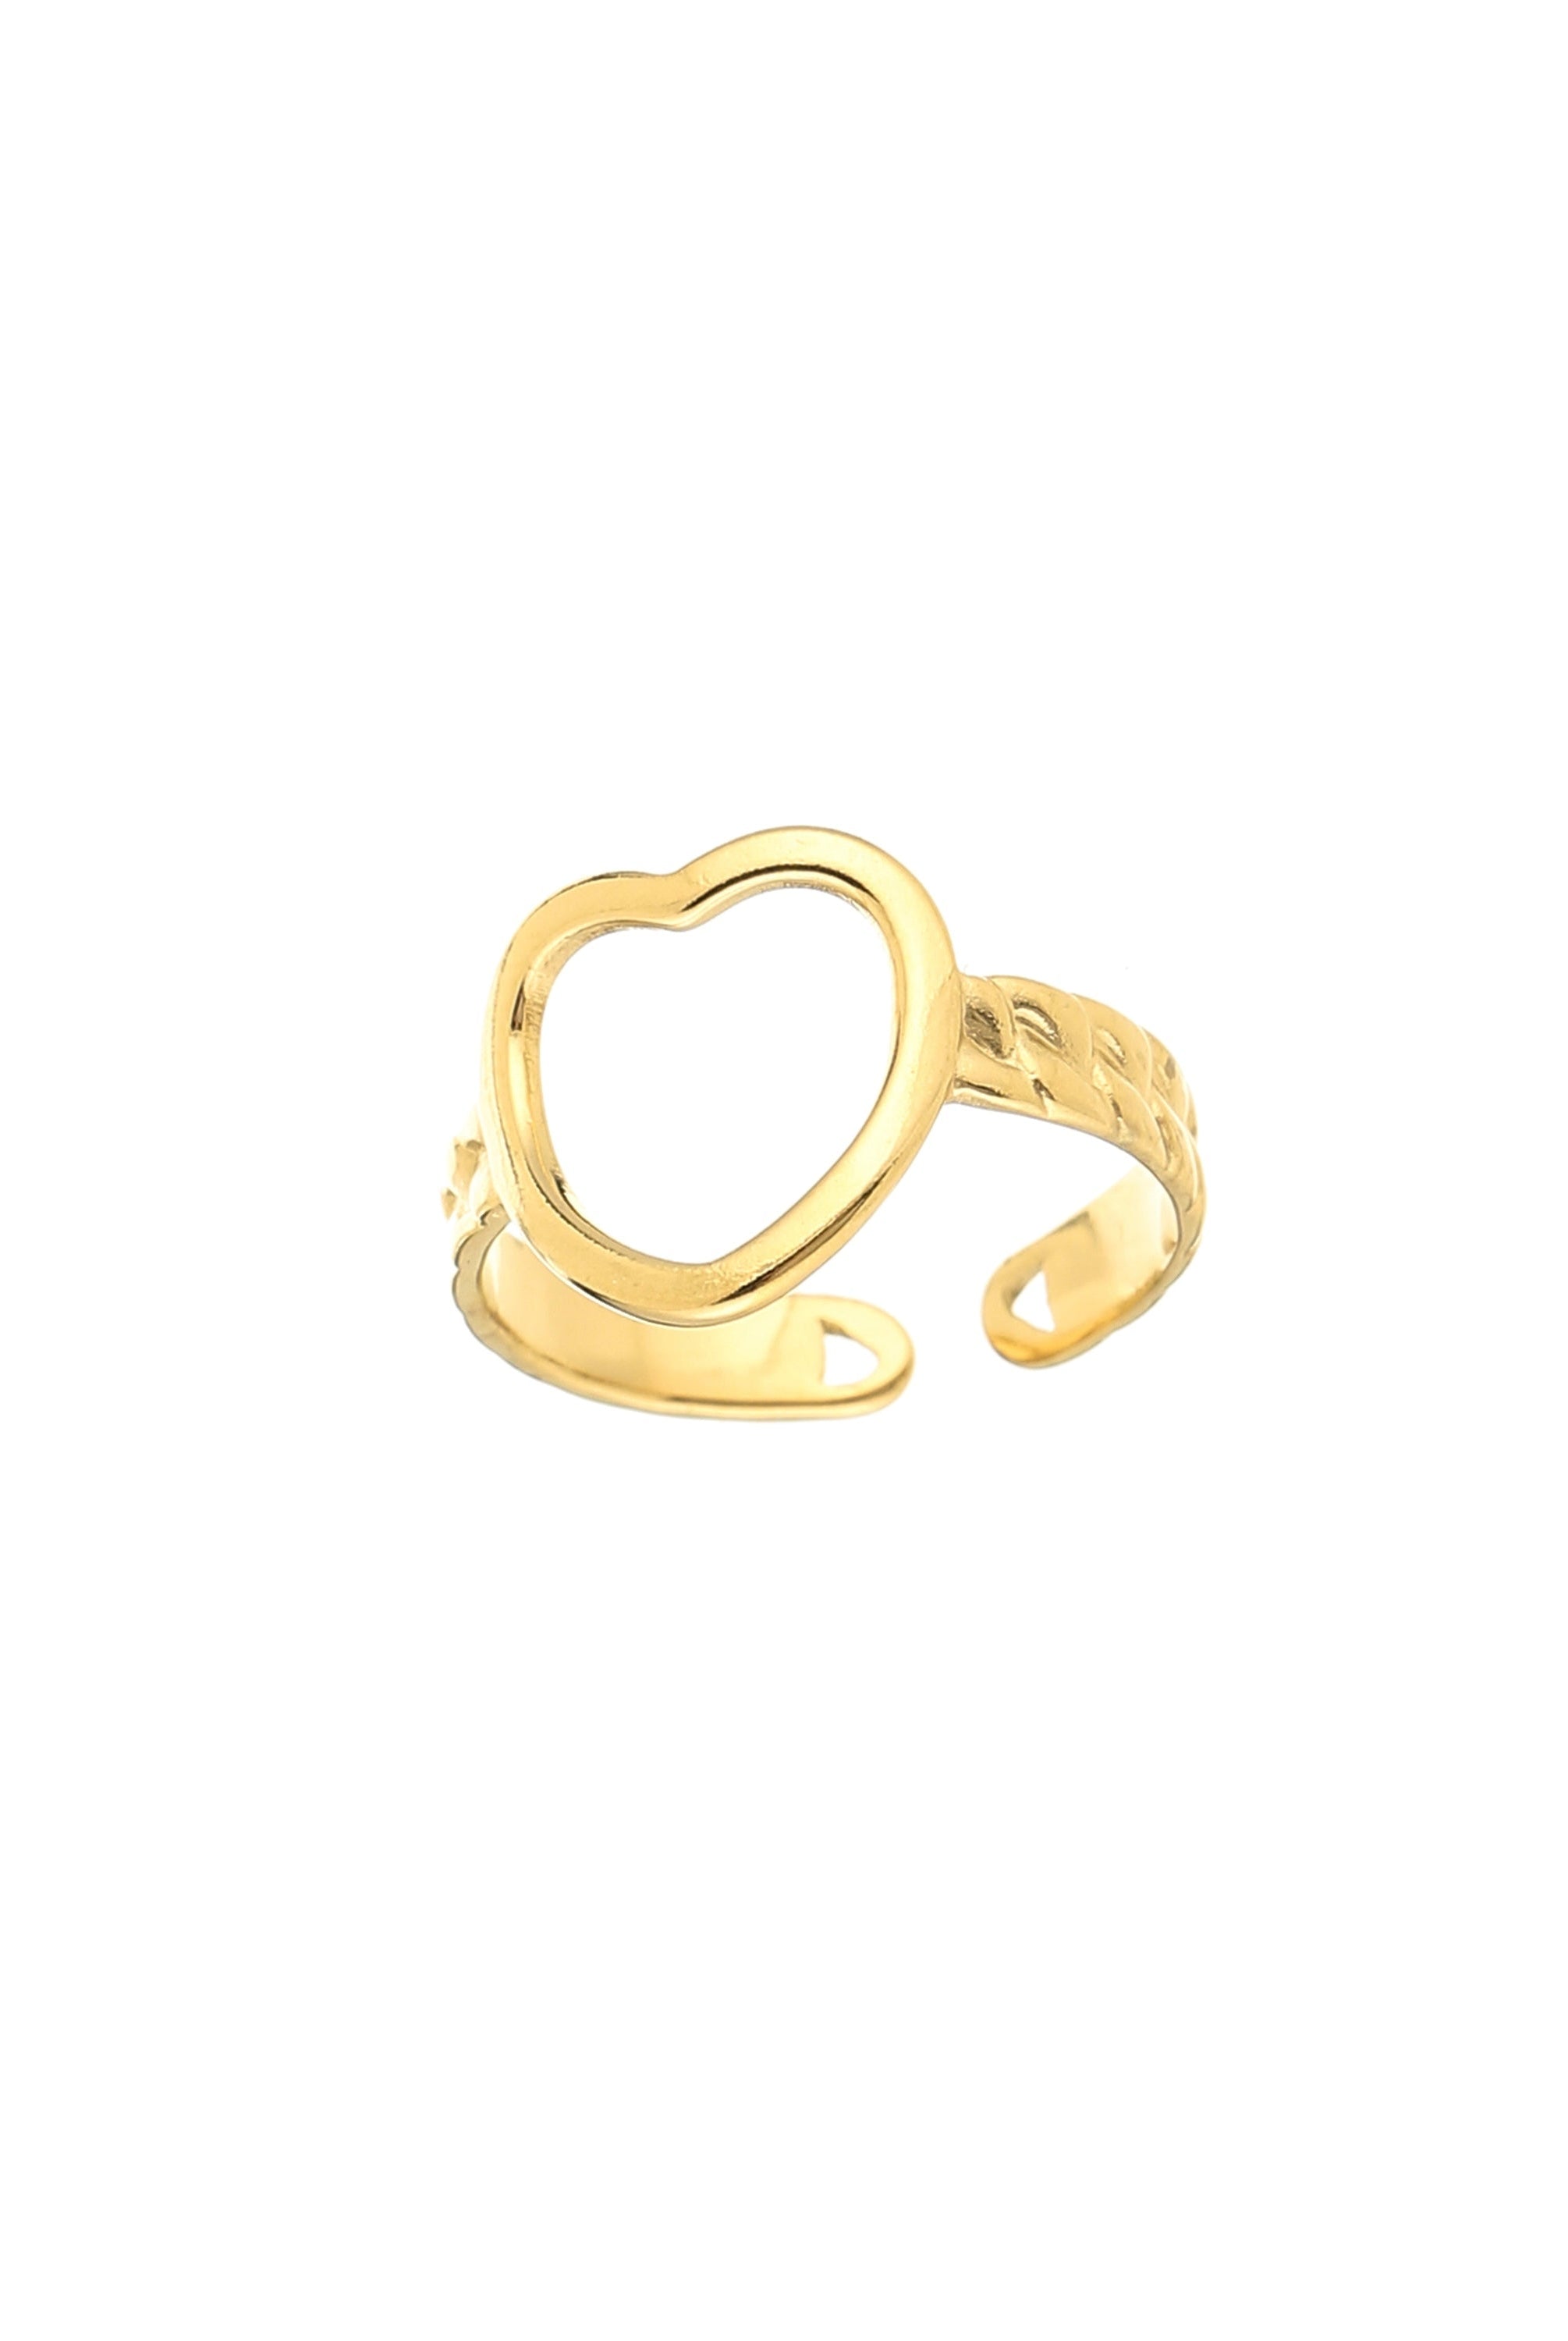 ♥︎OPEN HEART CHAIN RING - My Favourites